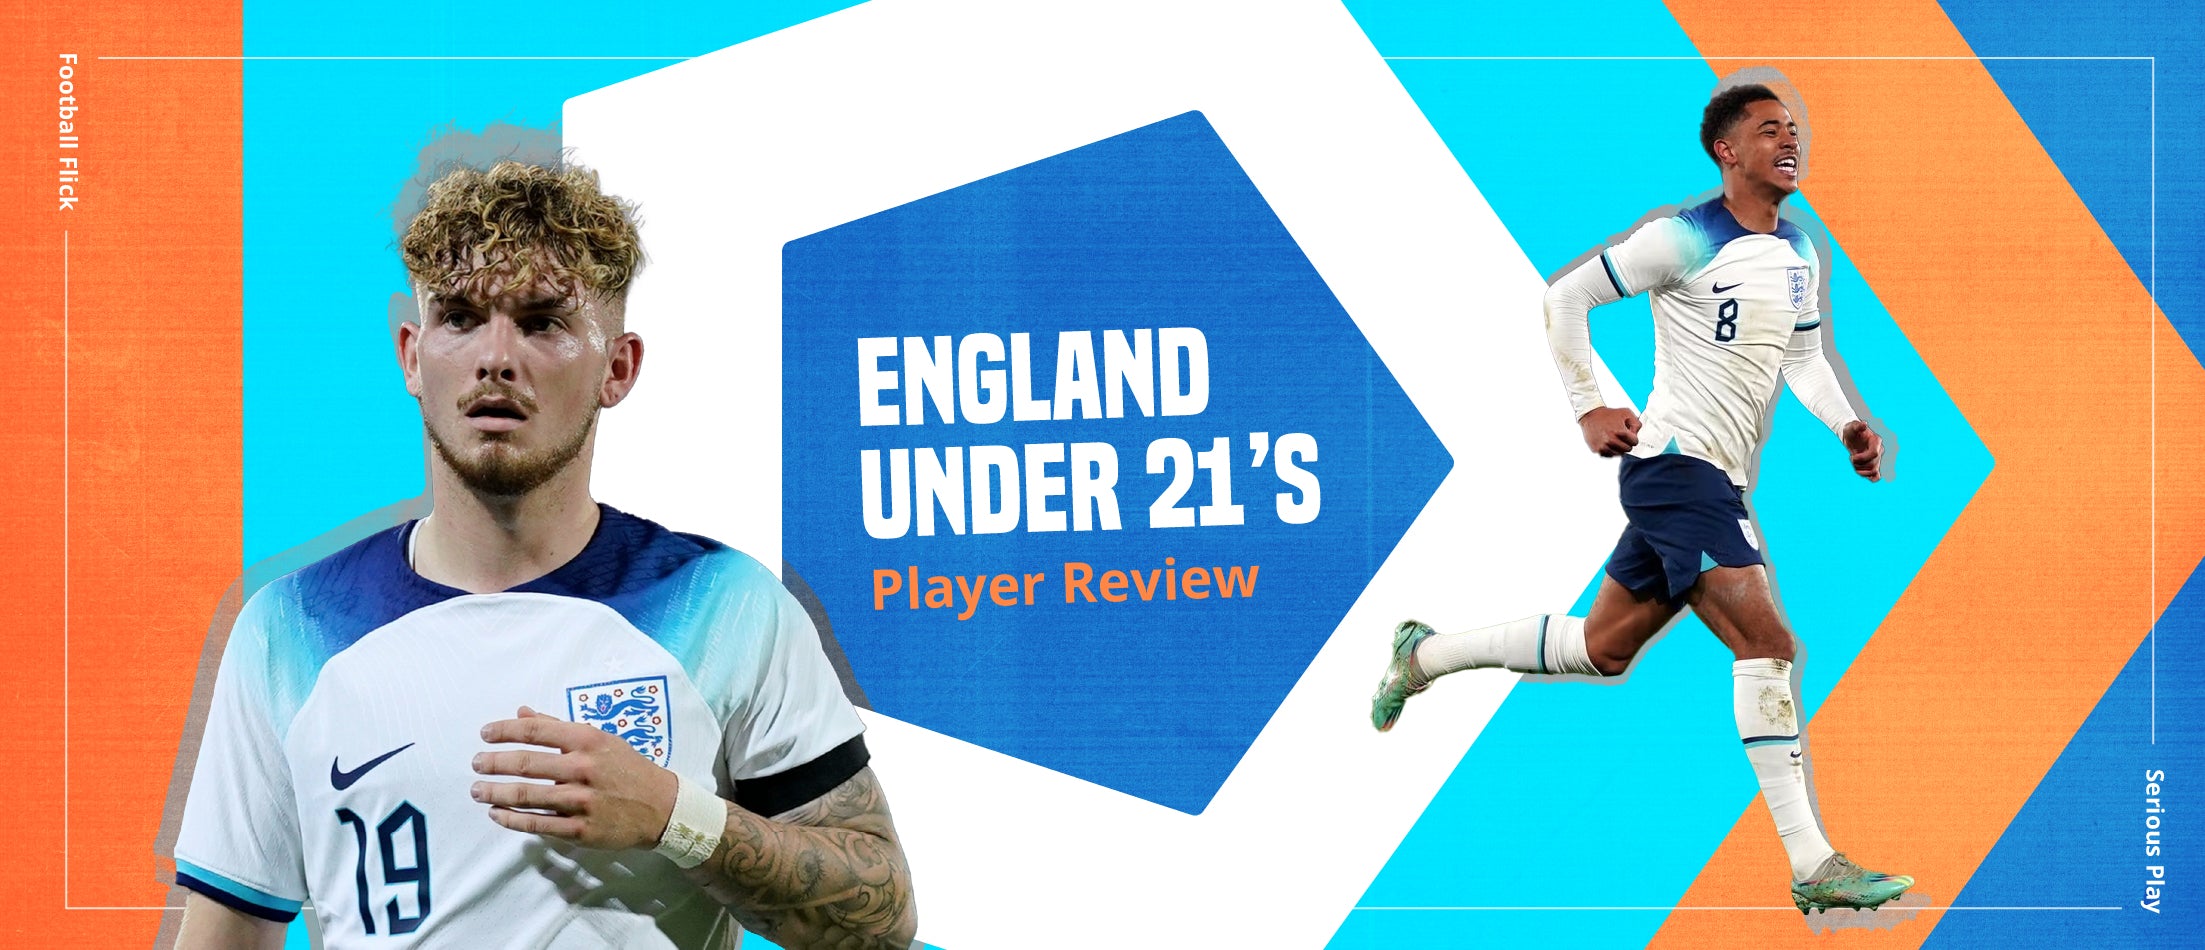 Squad Preview - England Under 21's